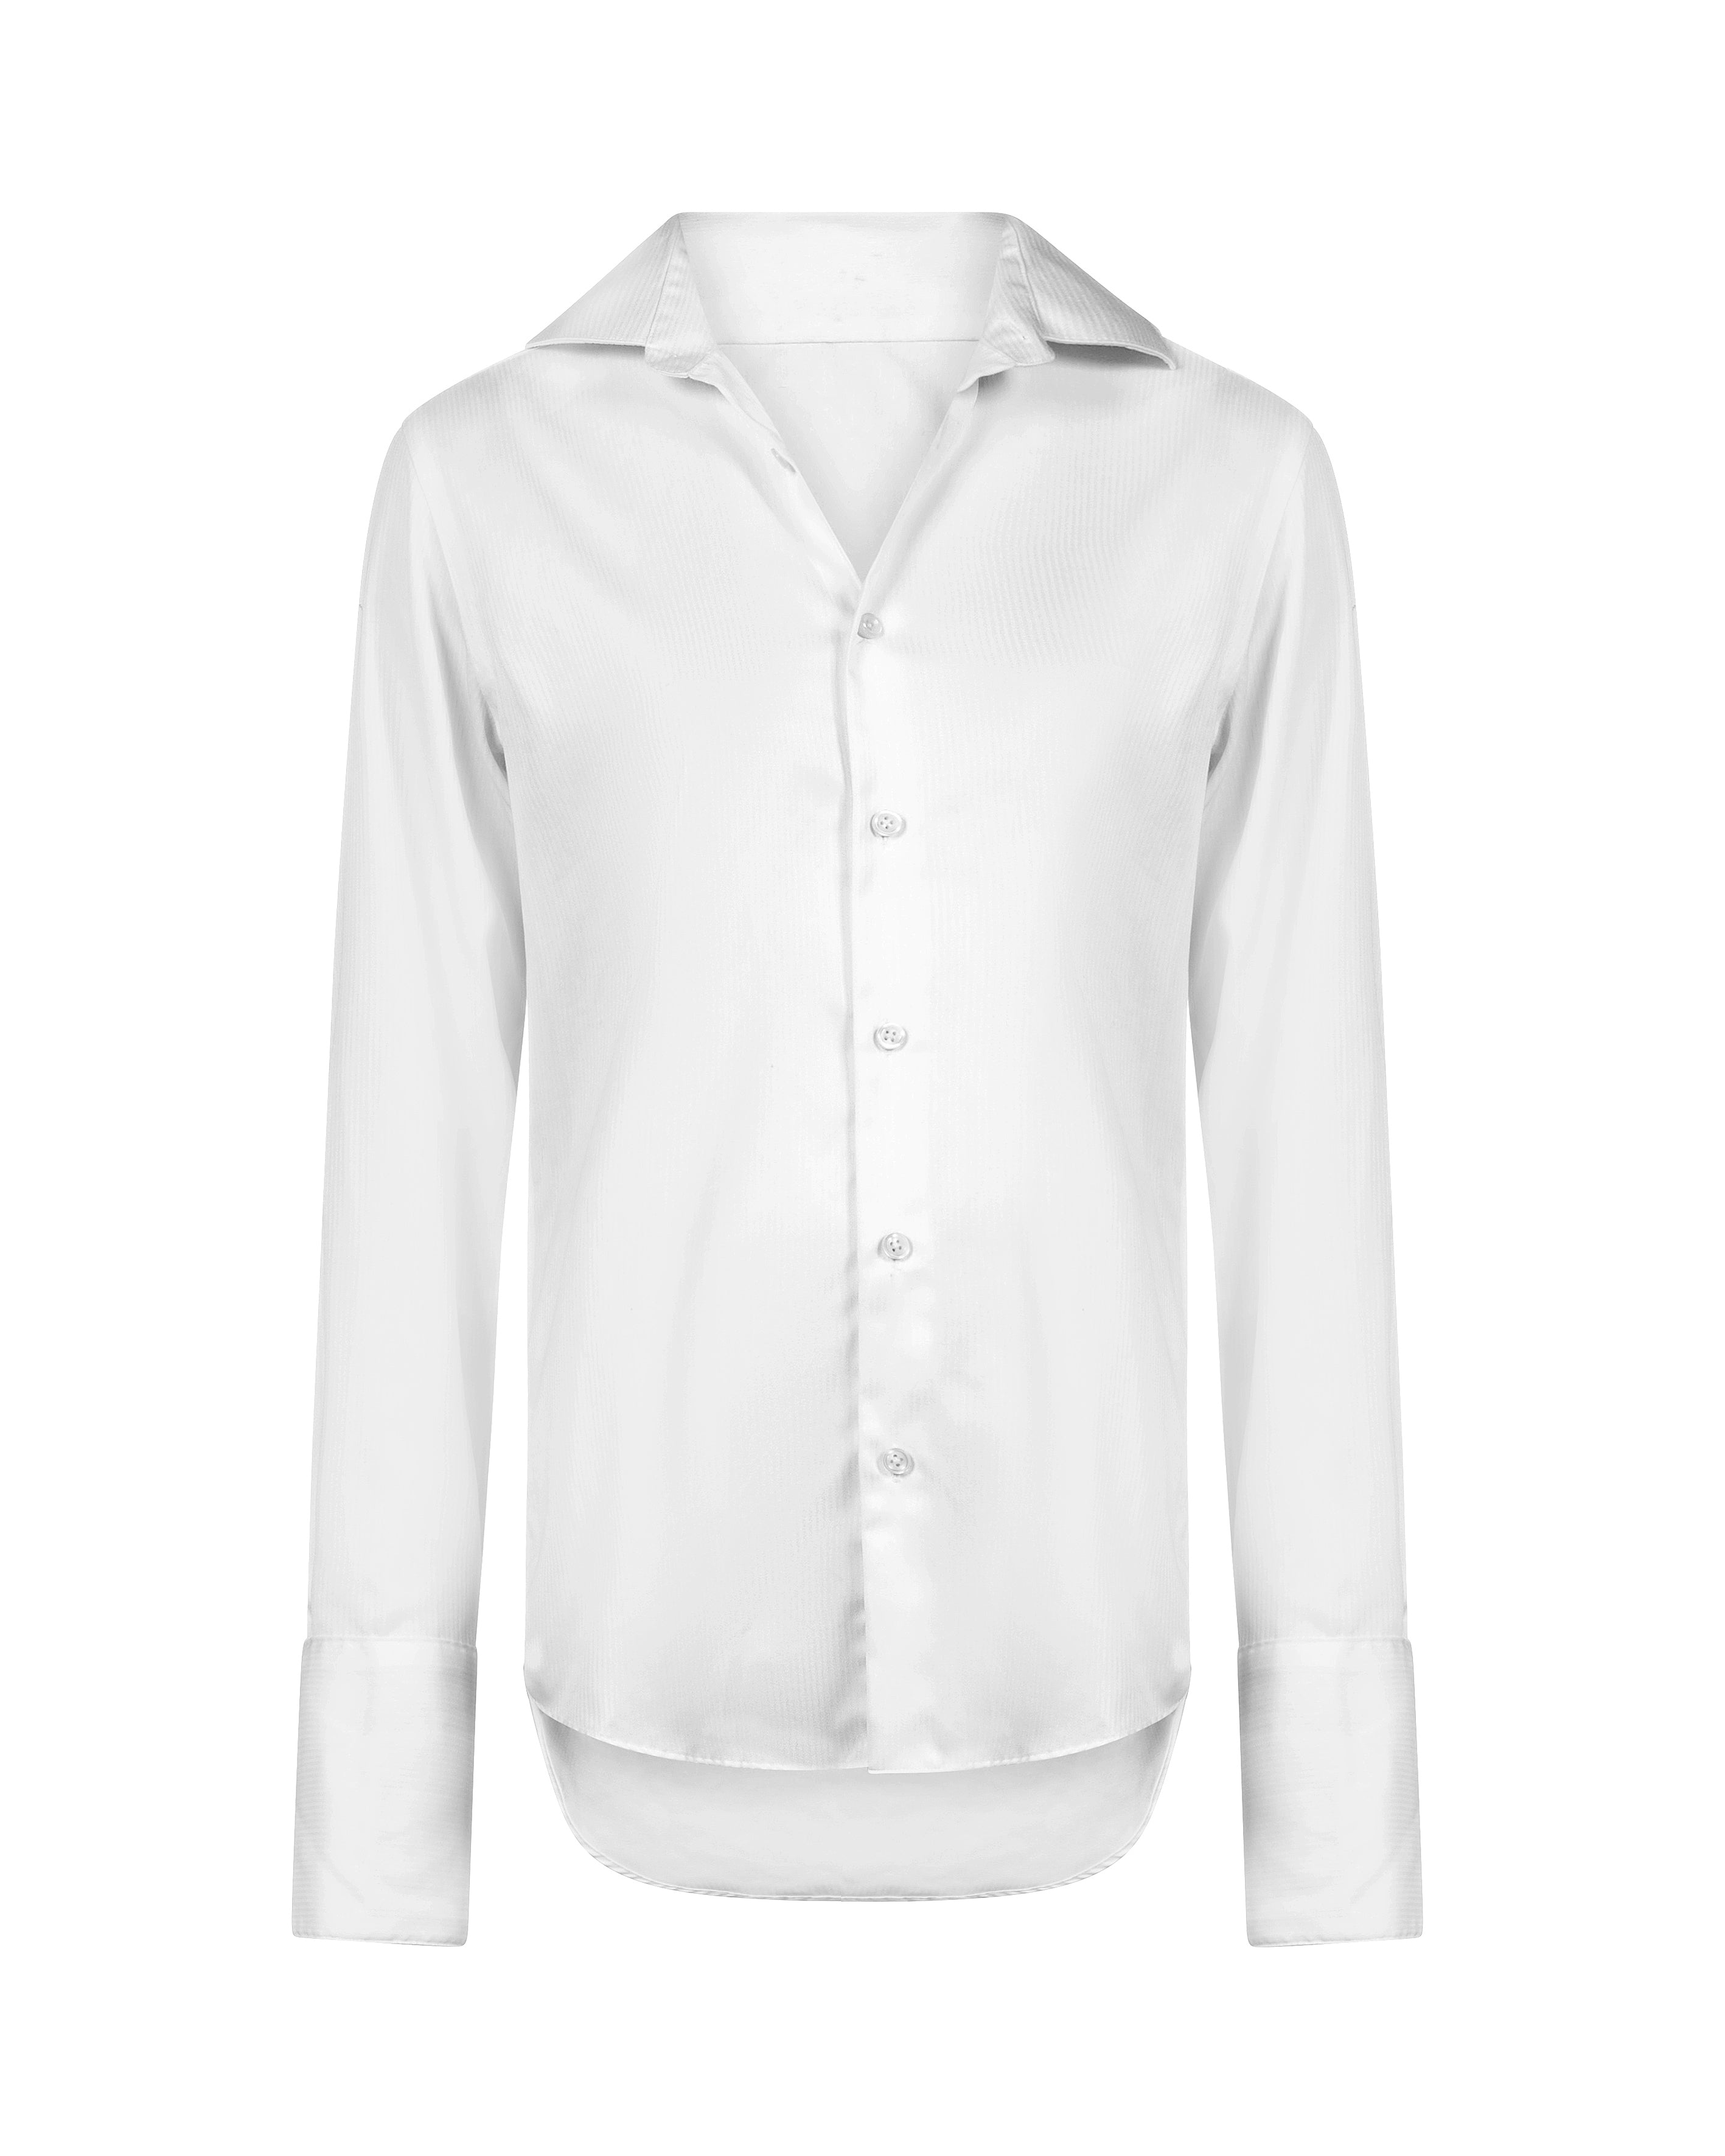 White smoking shirt with double cuffs.